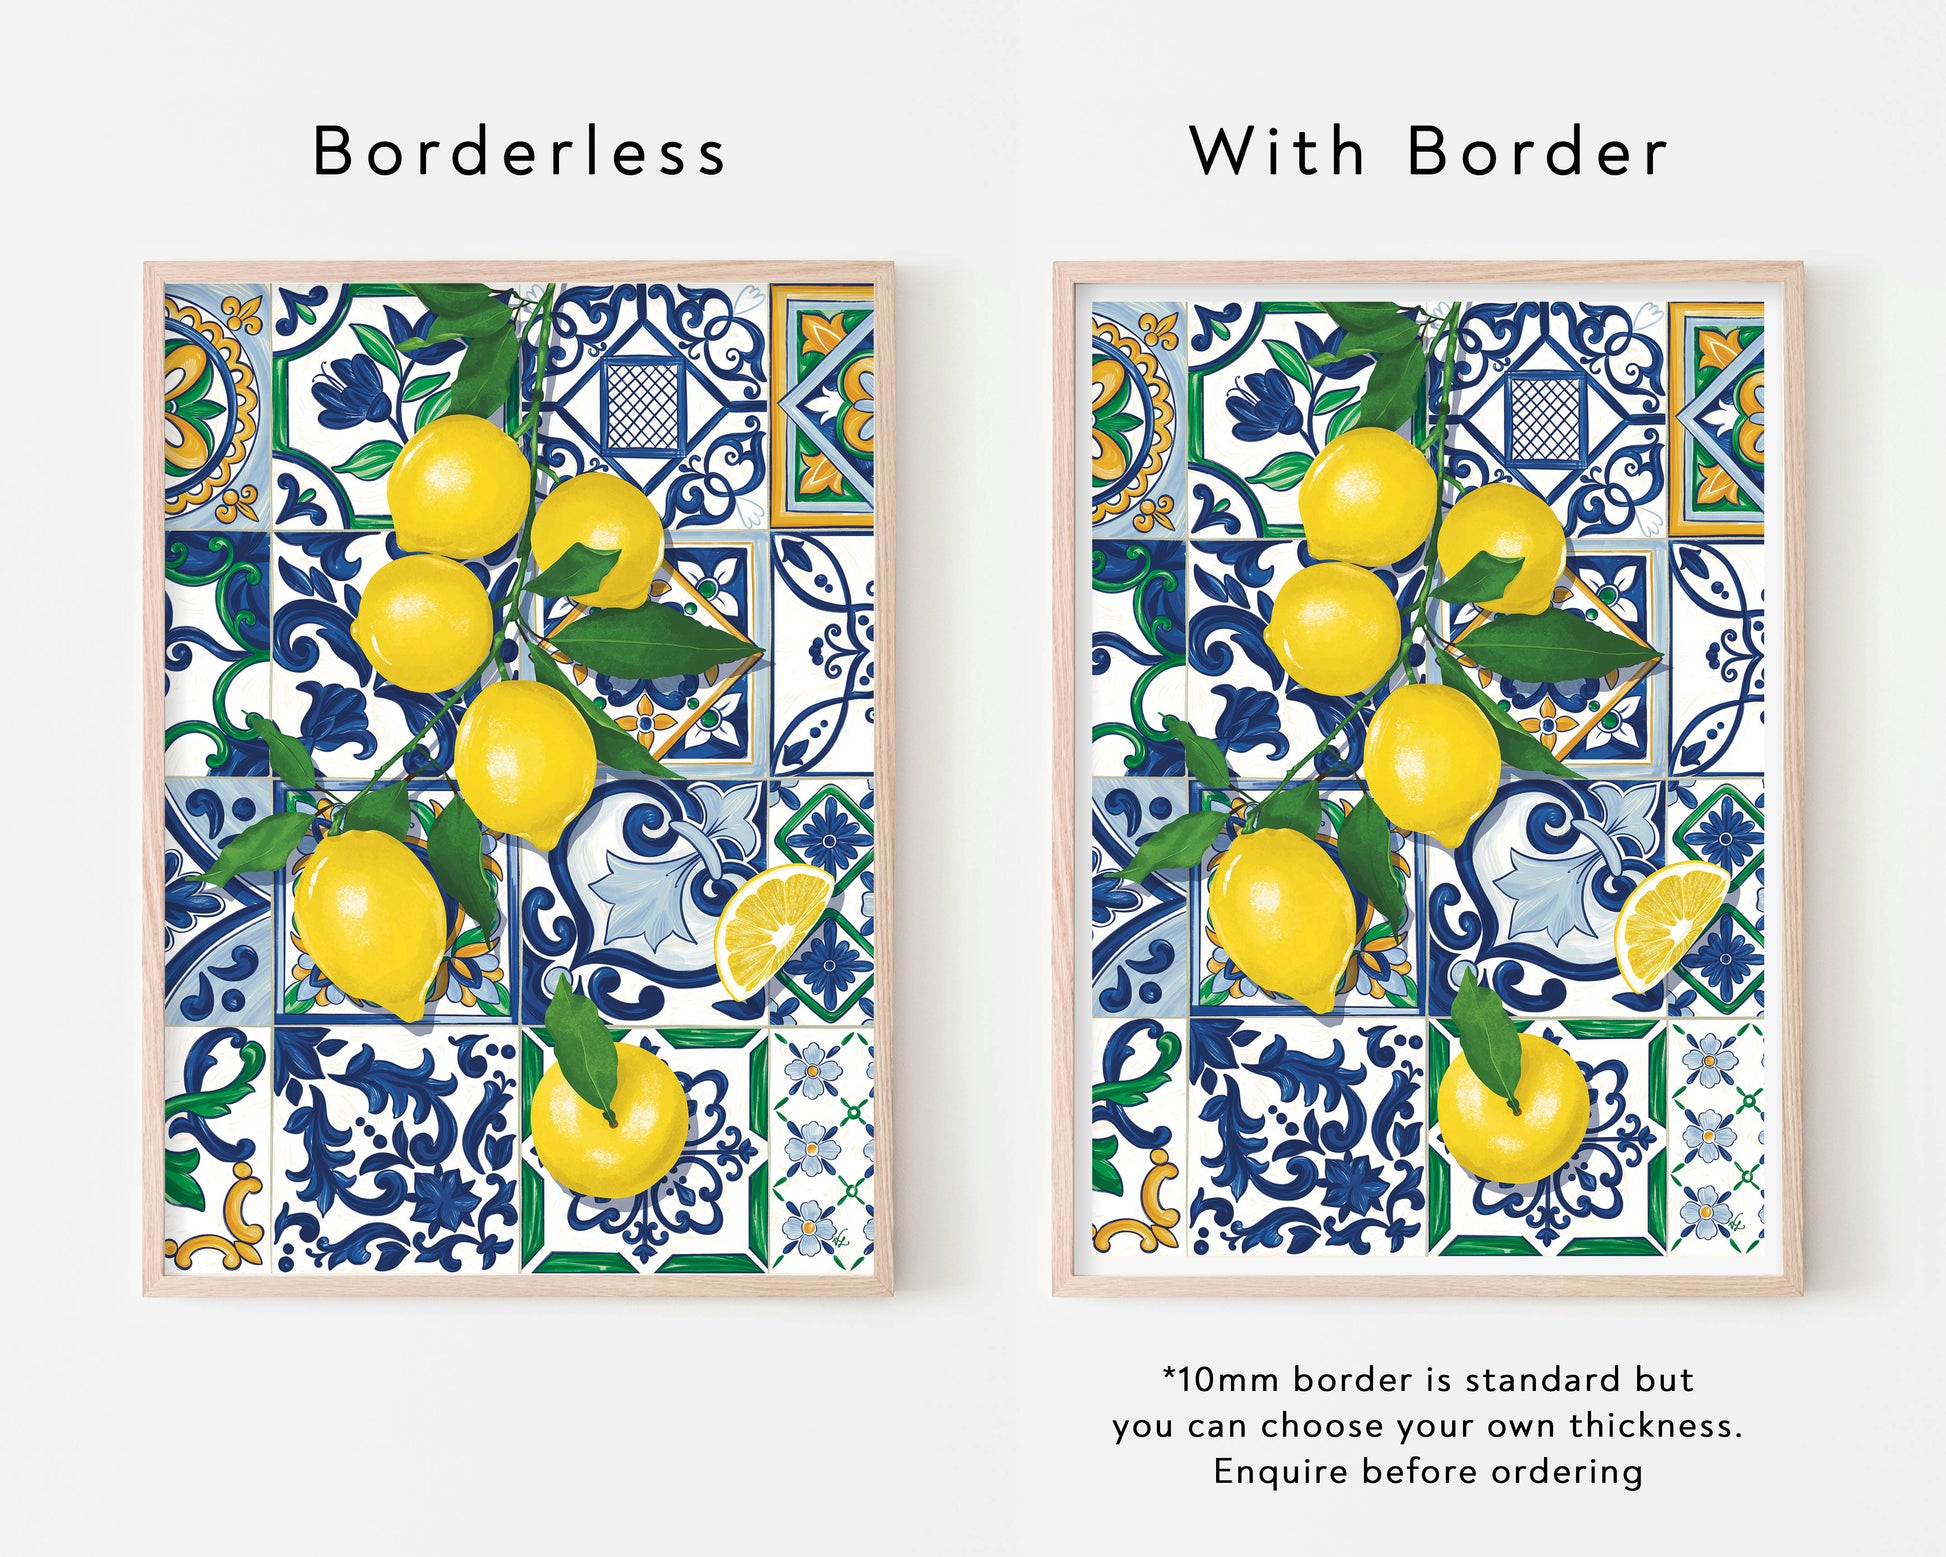 Art print of bright yellow Sicilian lemons over beautiful Italian tiles. This juicy fruit art print will bring colour and fun into any kitchen. The perfect wall art for a foodie or Italy enthusiast.